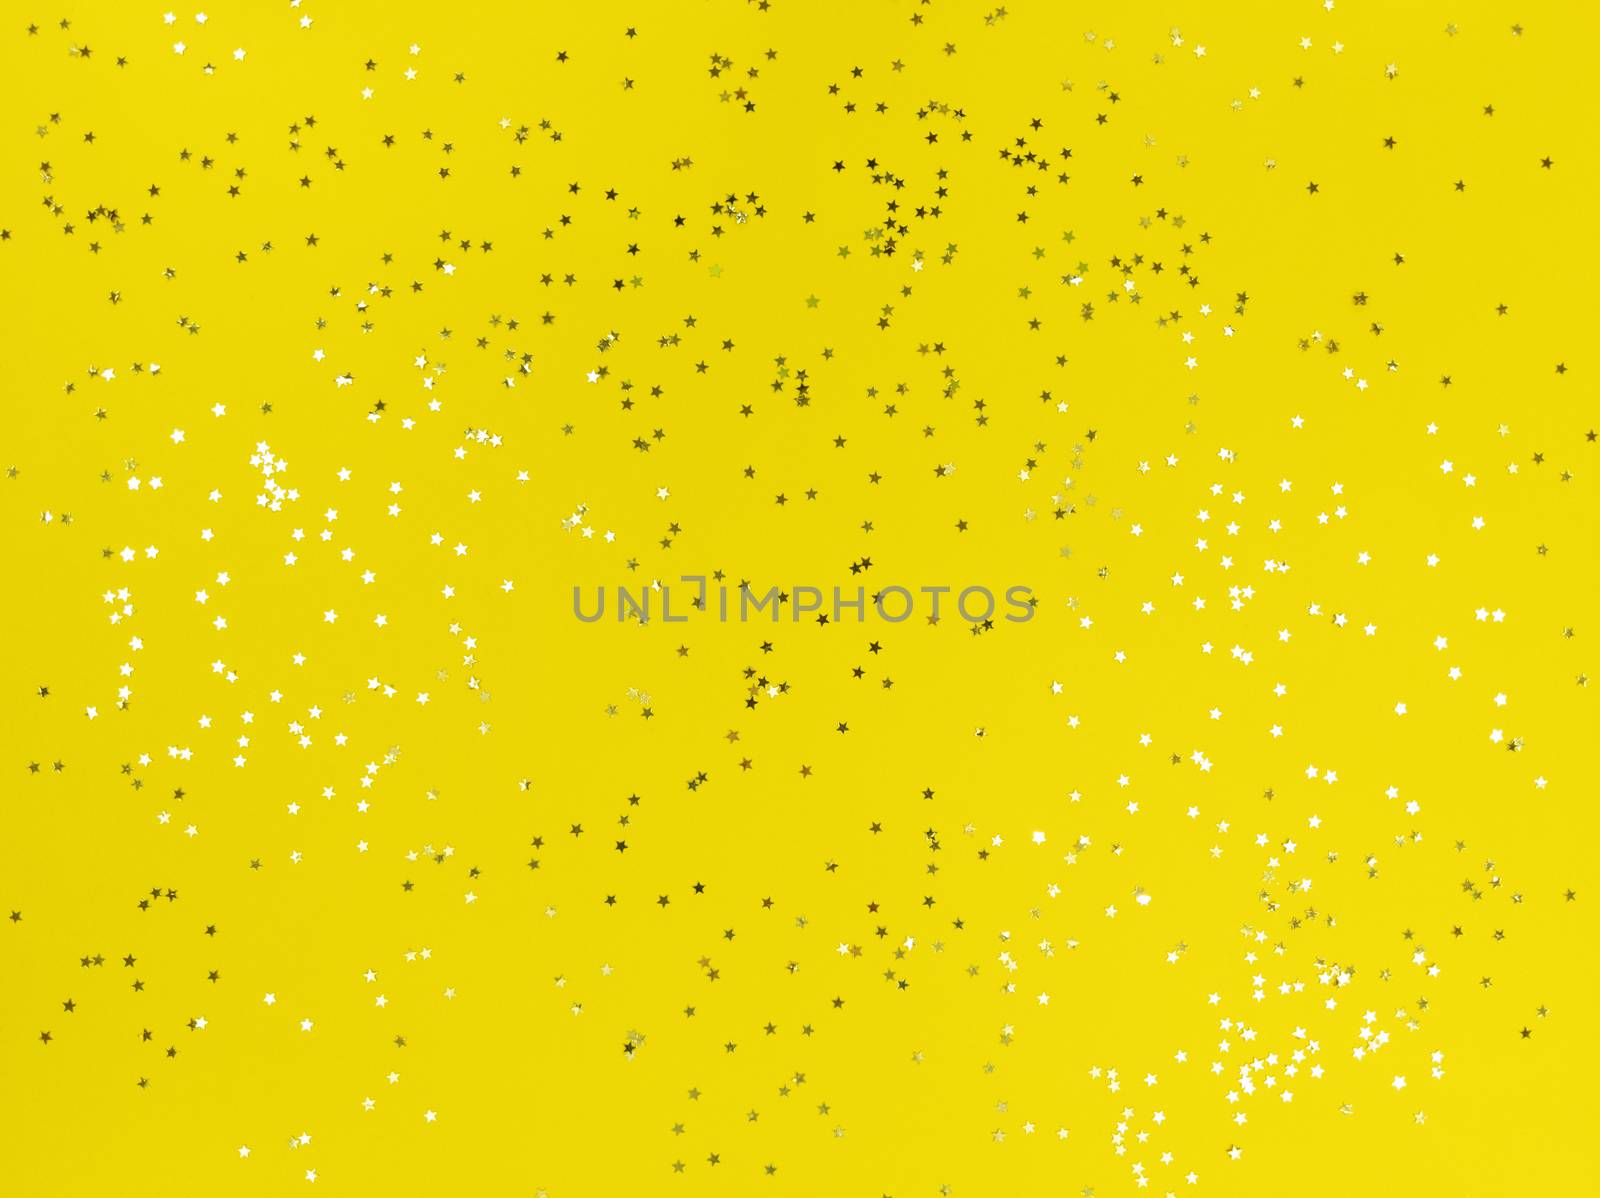 Confetti stars sparkling on yellow background.